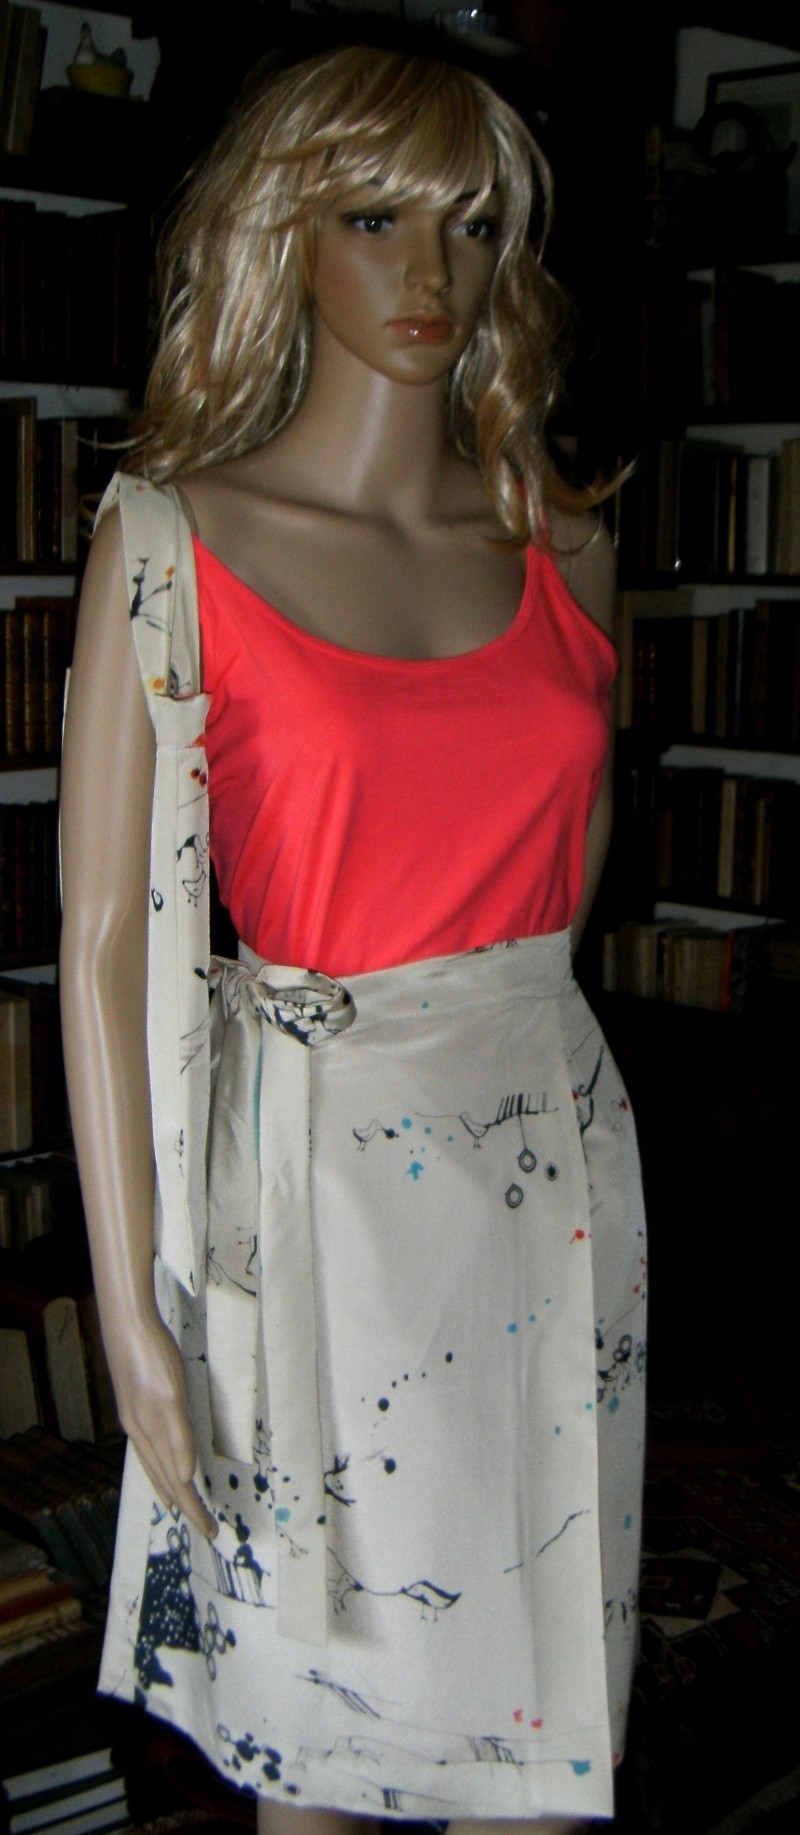 Galerie couture, broderie, de Lise - Page 17 Jupepo10